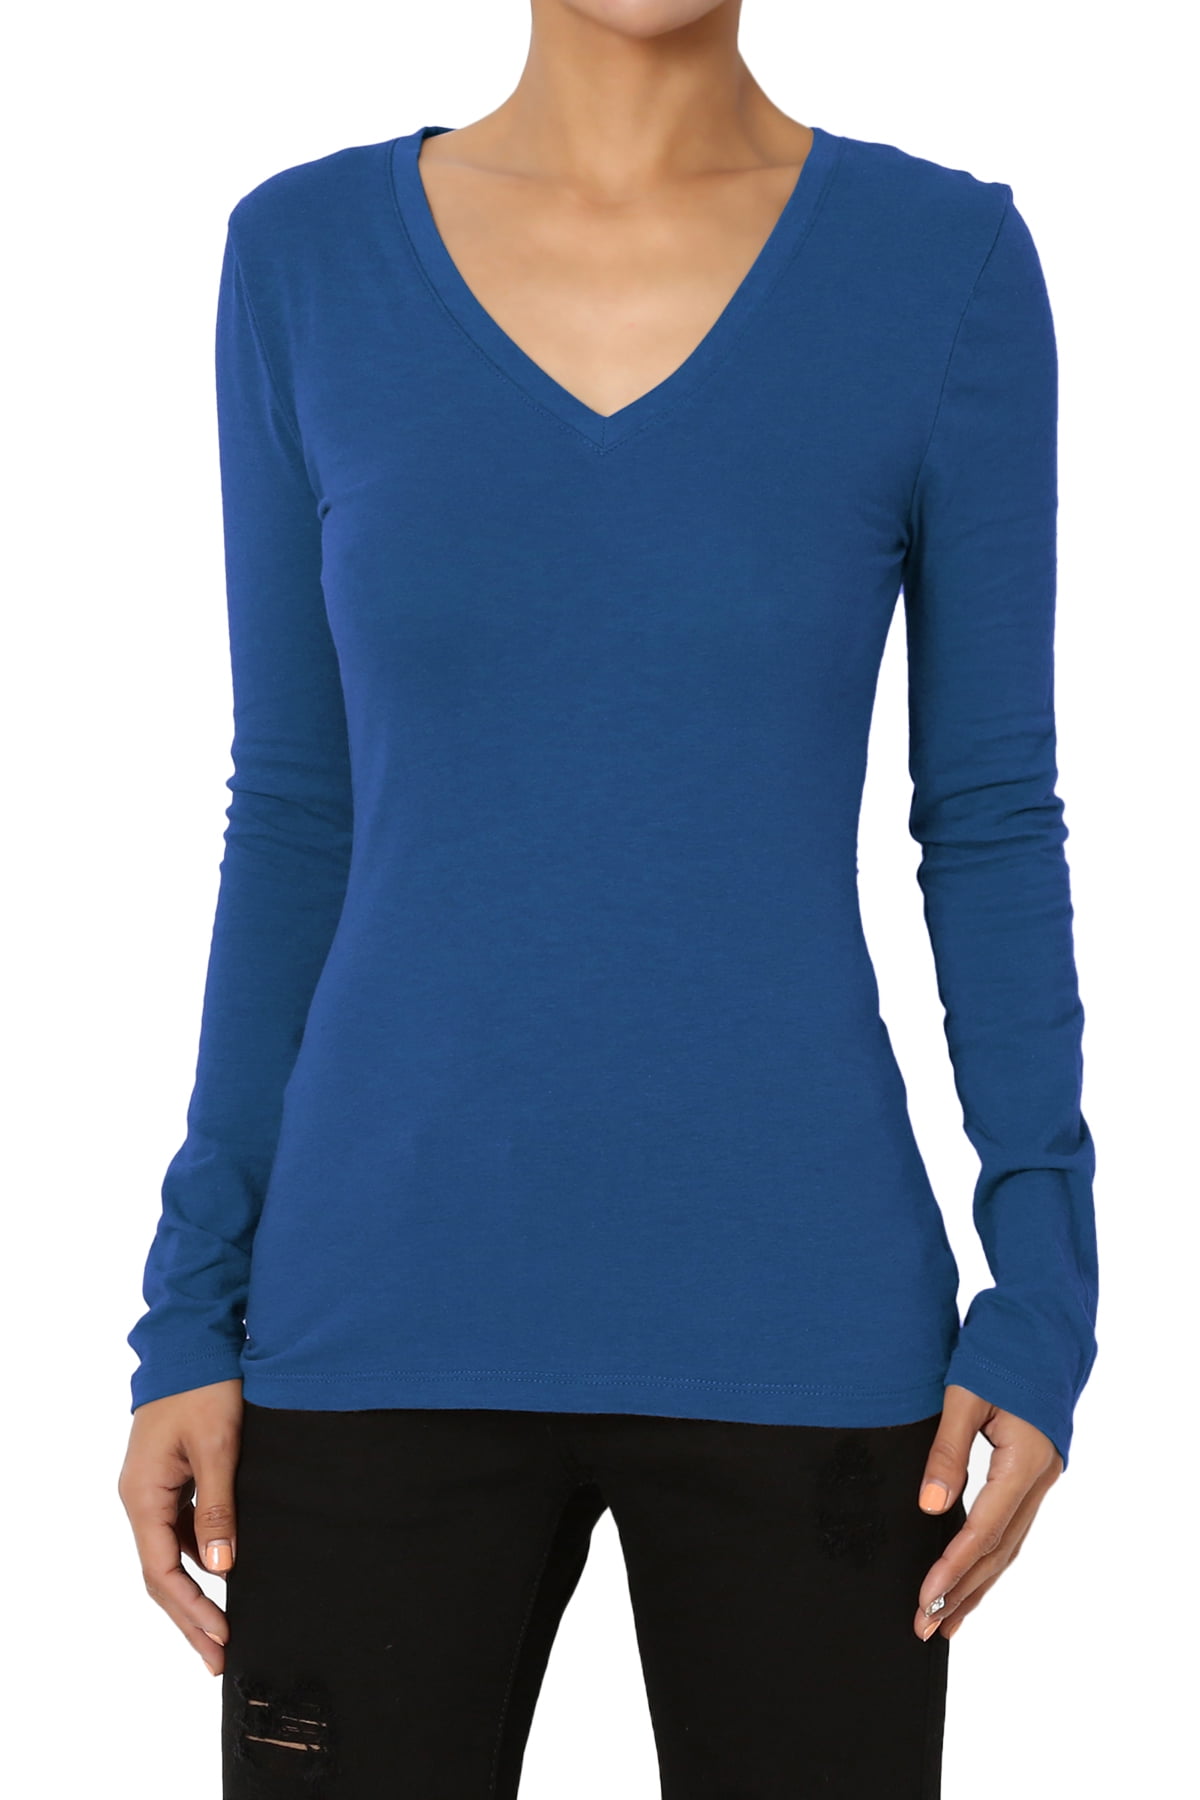 TheMogan Women's Basic Plain Solid V-Neck Long Sleeve Tee Cotton Fitted ...